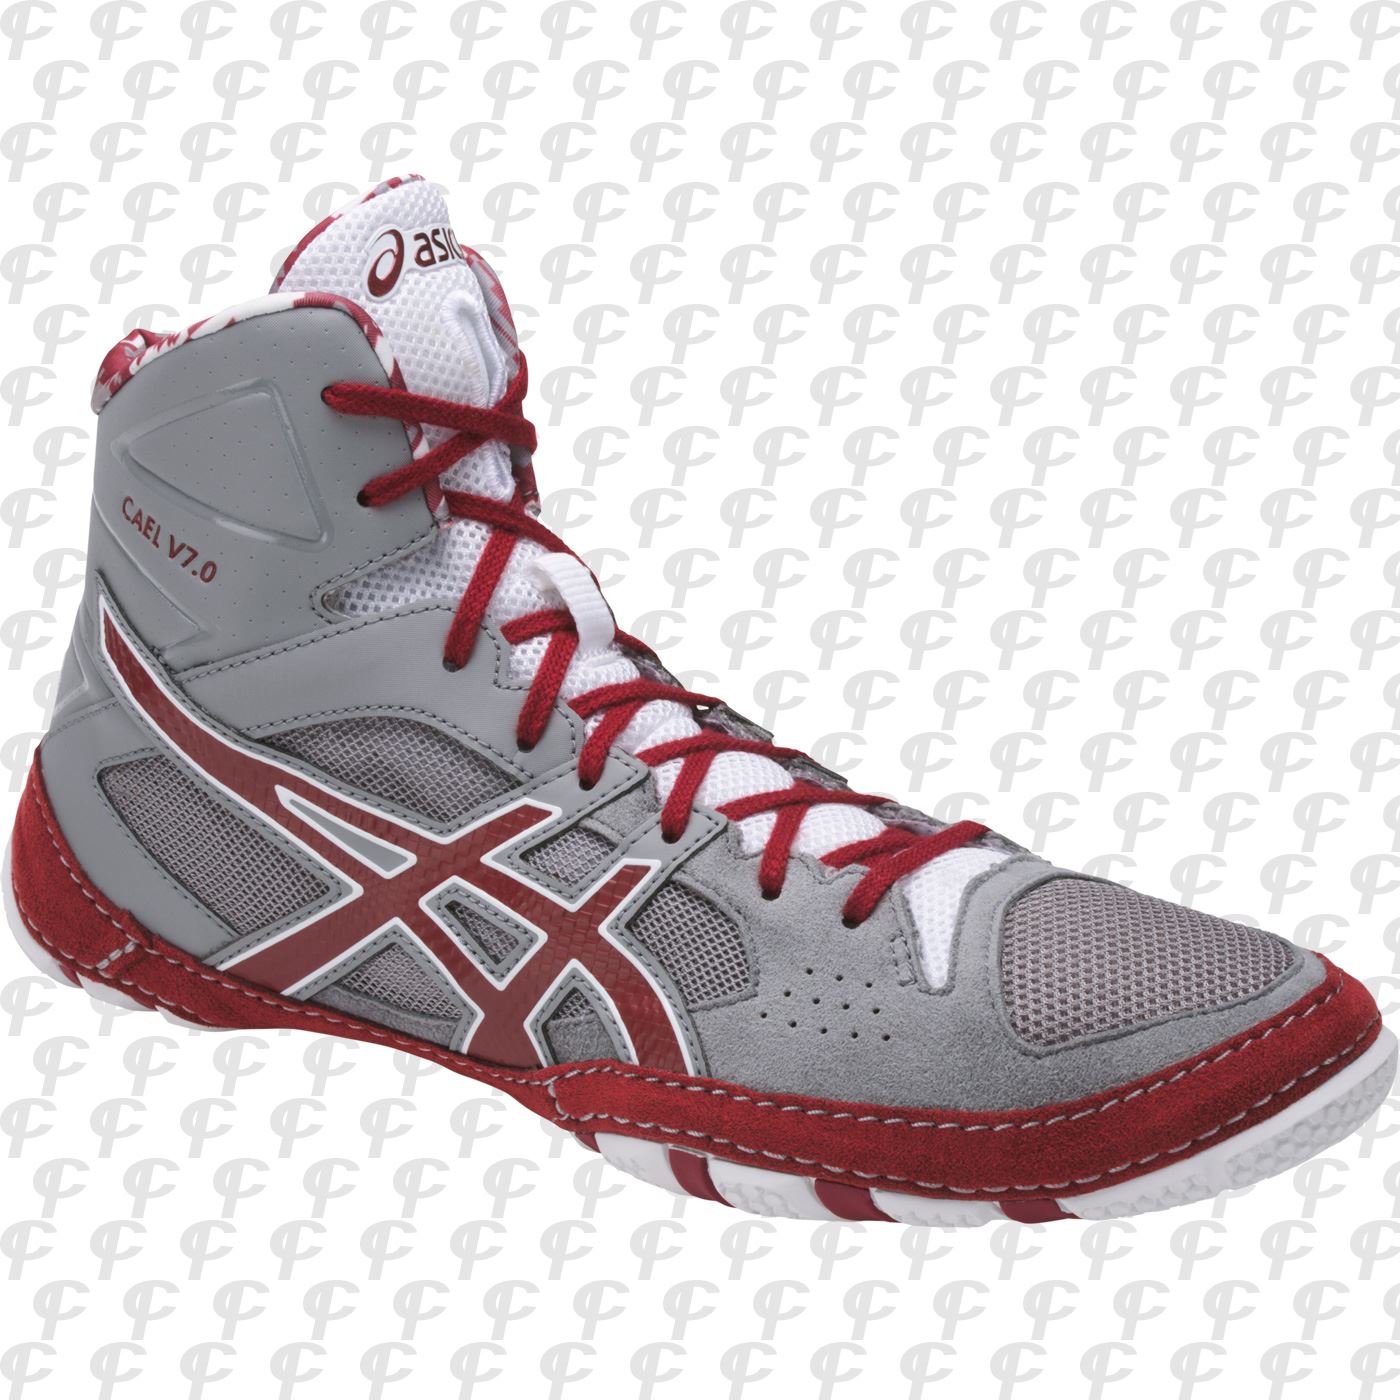 cael 7.0 wrestling shoes